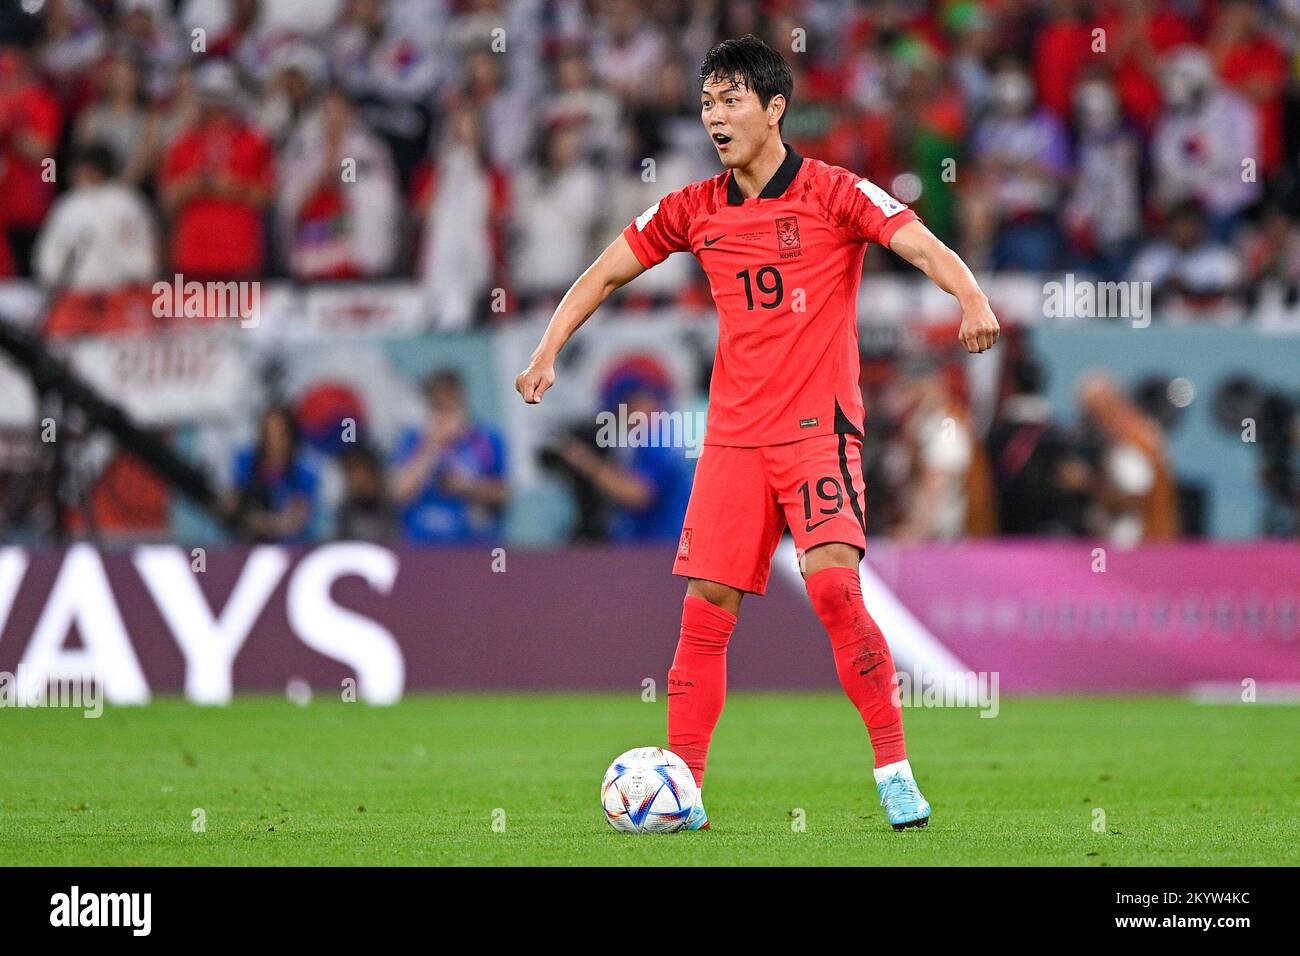 AL RAYYAN, QATAR - DECEMBER 2: Young-gwon Kim of Korea Republic runs with the ball during the Group H - FIFA World Cup Qatar 2022 match between Korea Republic and Portugal at the Education City Stadium on December 2, 2022 in Al Rayyan, Qatar (Photo by Pablo Morano/BSR Agency) Stock Photo